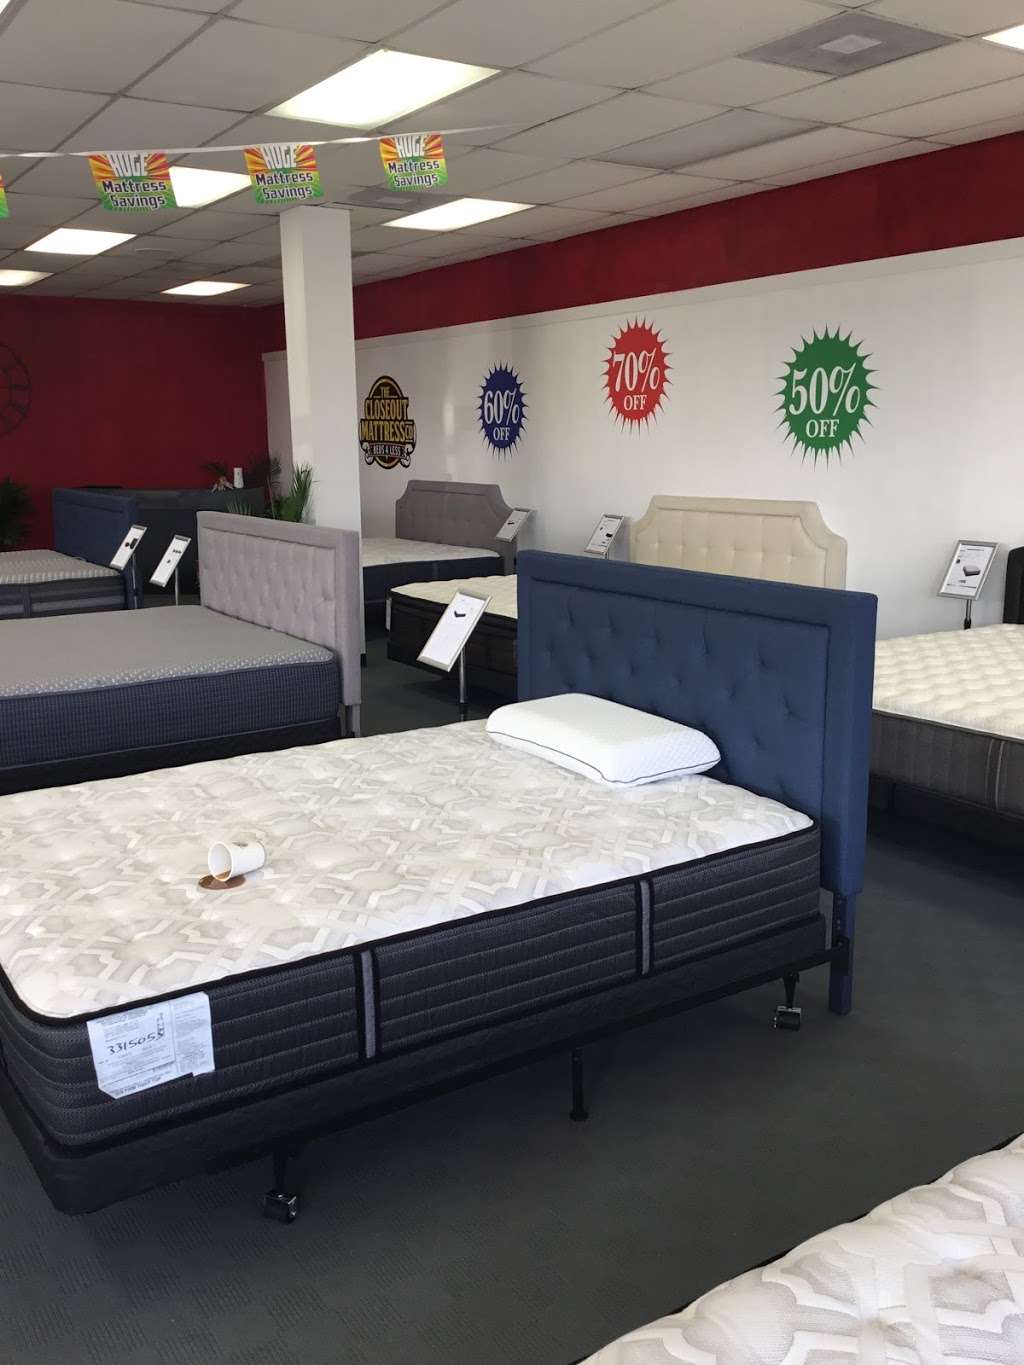 The Closeout Mattress Co | 2410A S Stemmons Fwy, Lewisville, TX 75056, USA | Phone: (214) 513-9450